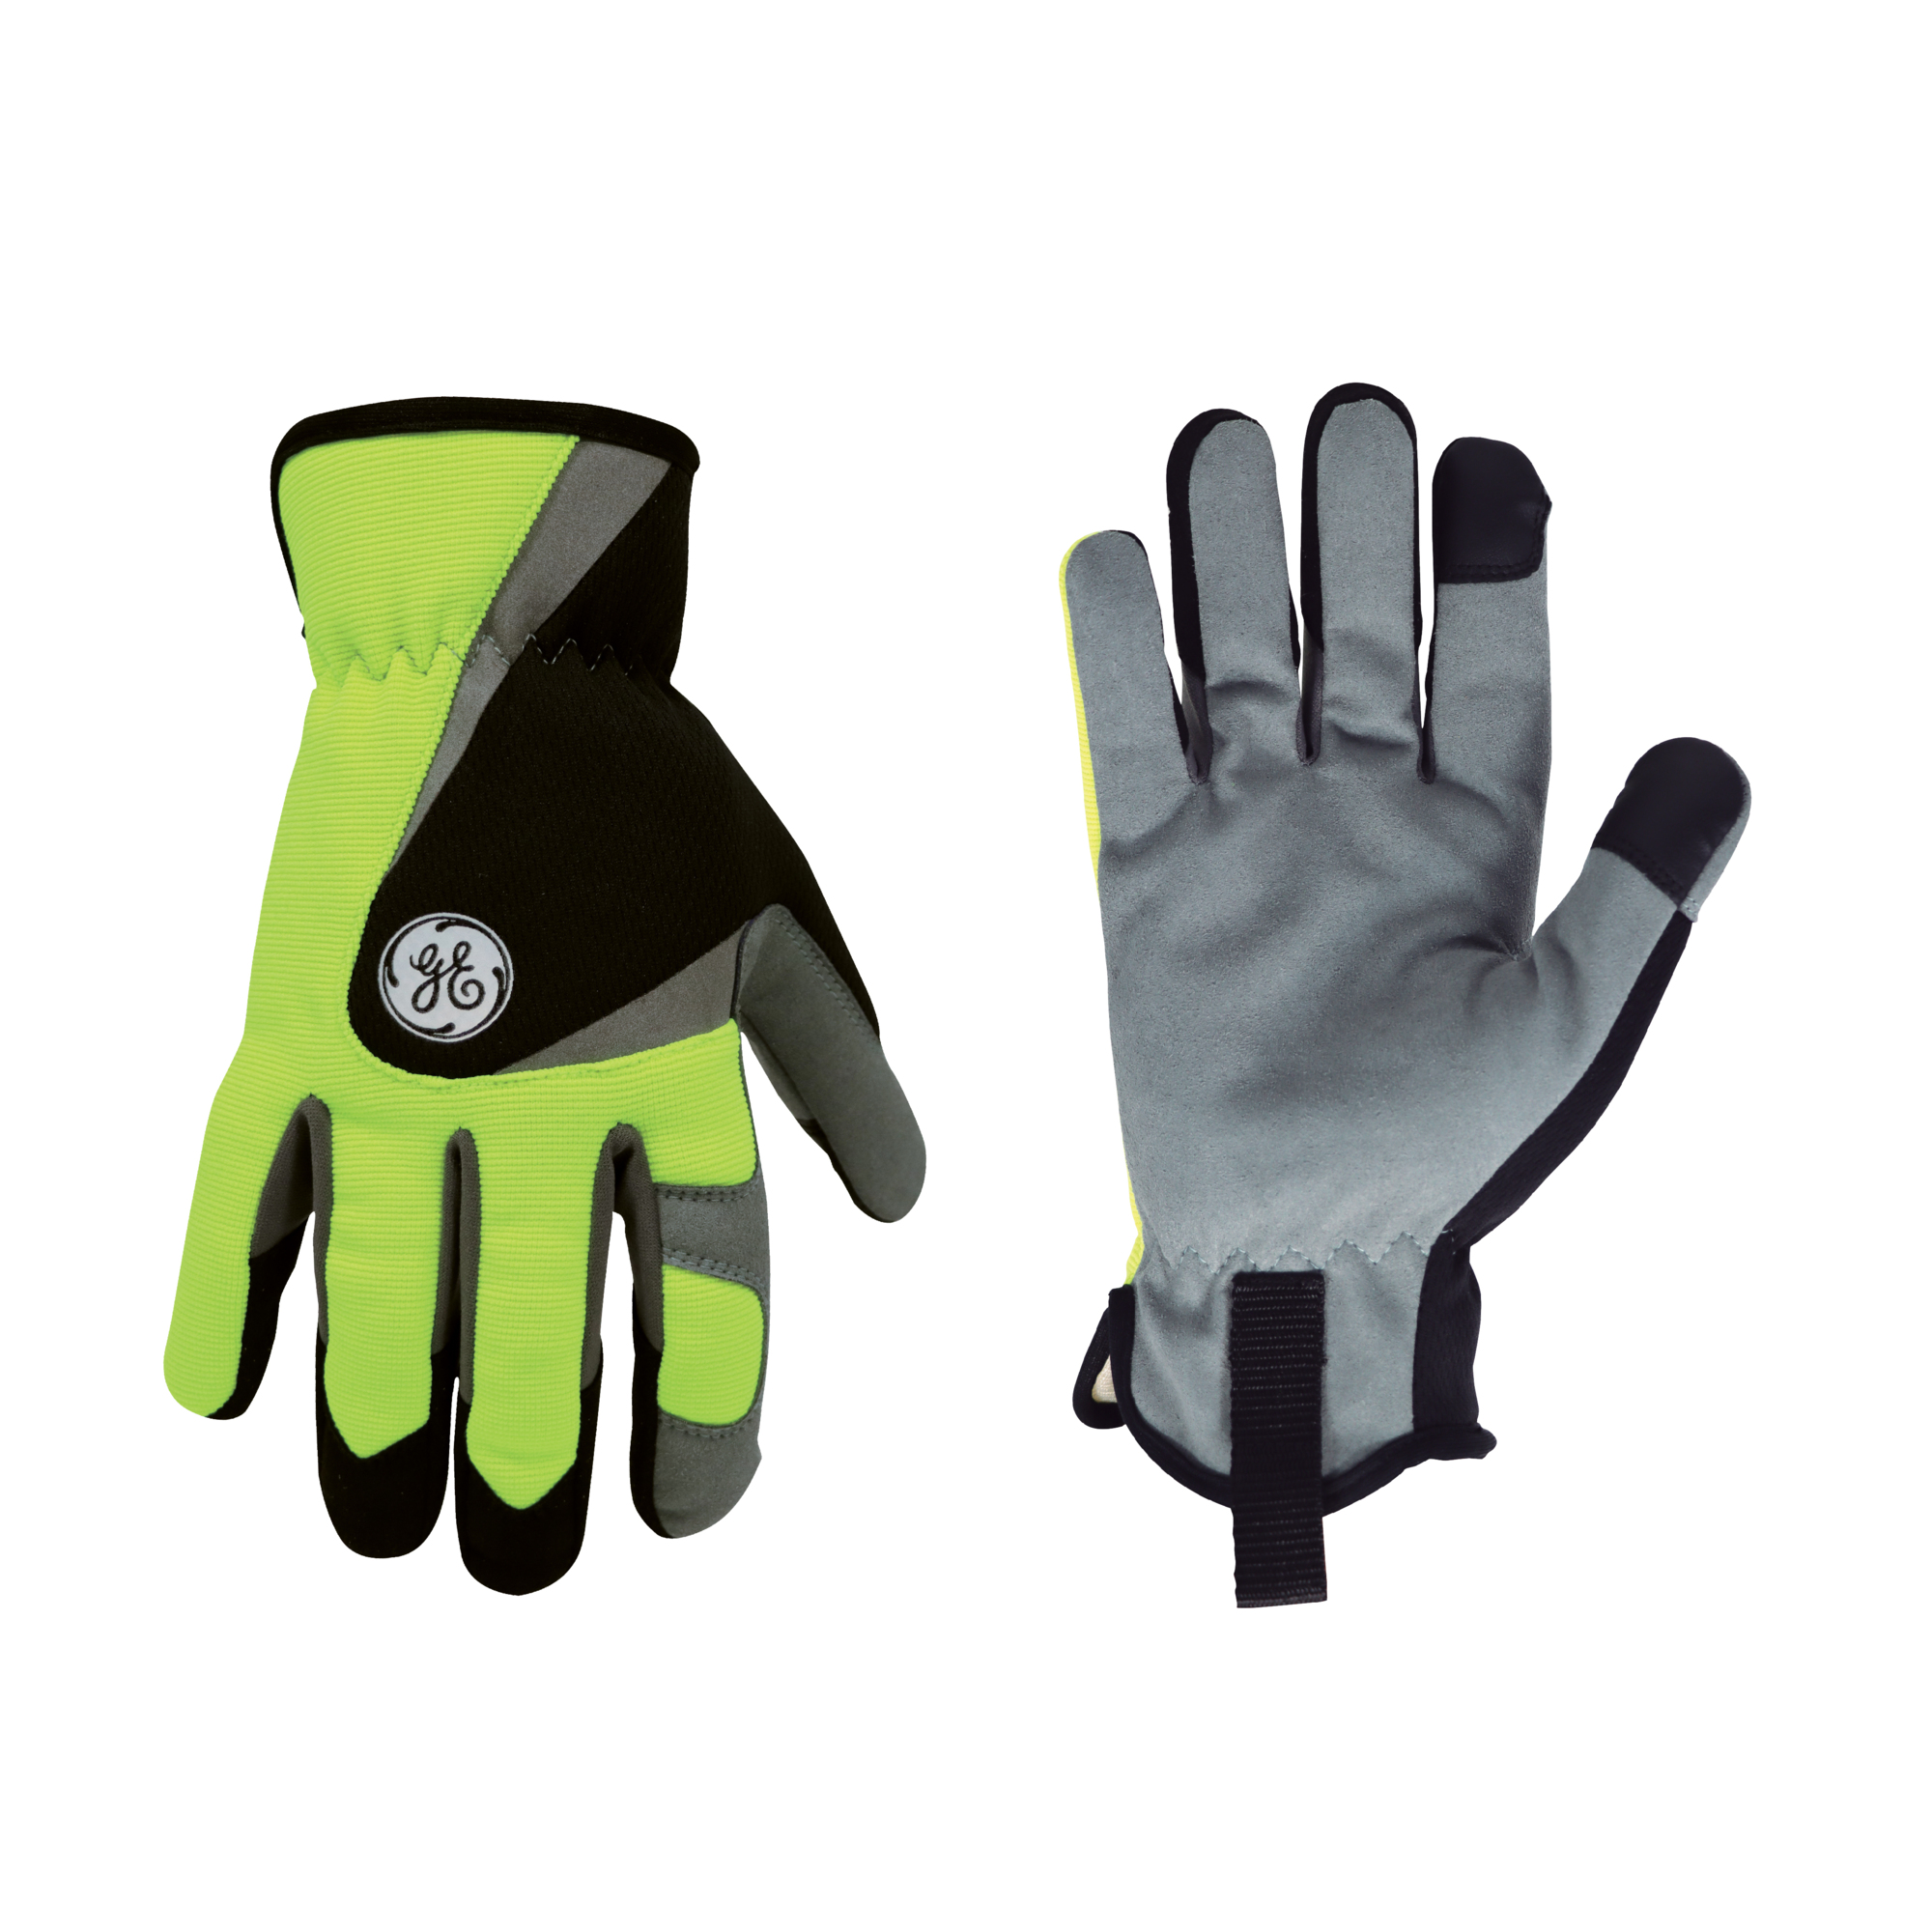 General Electric, Mechanic's Glove High-Vis Green XL 1 pair, Size XL, Included (qty.) 1, Model GG402XLC